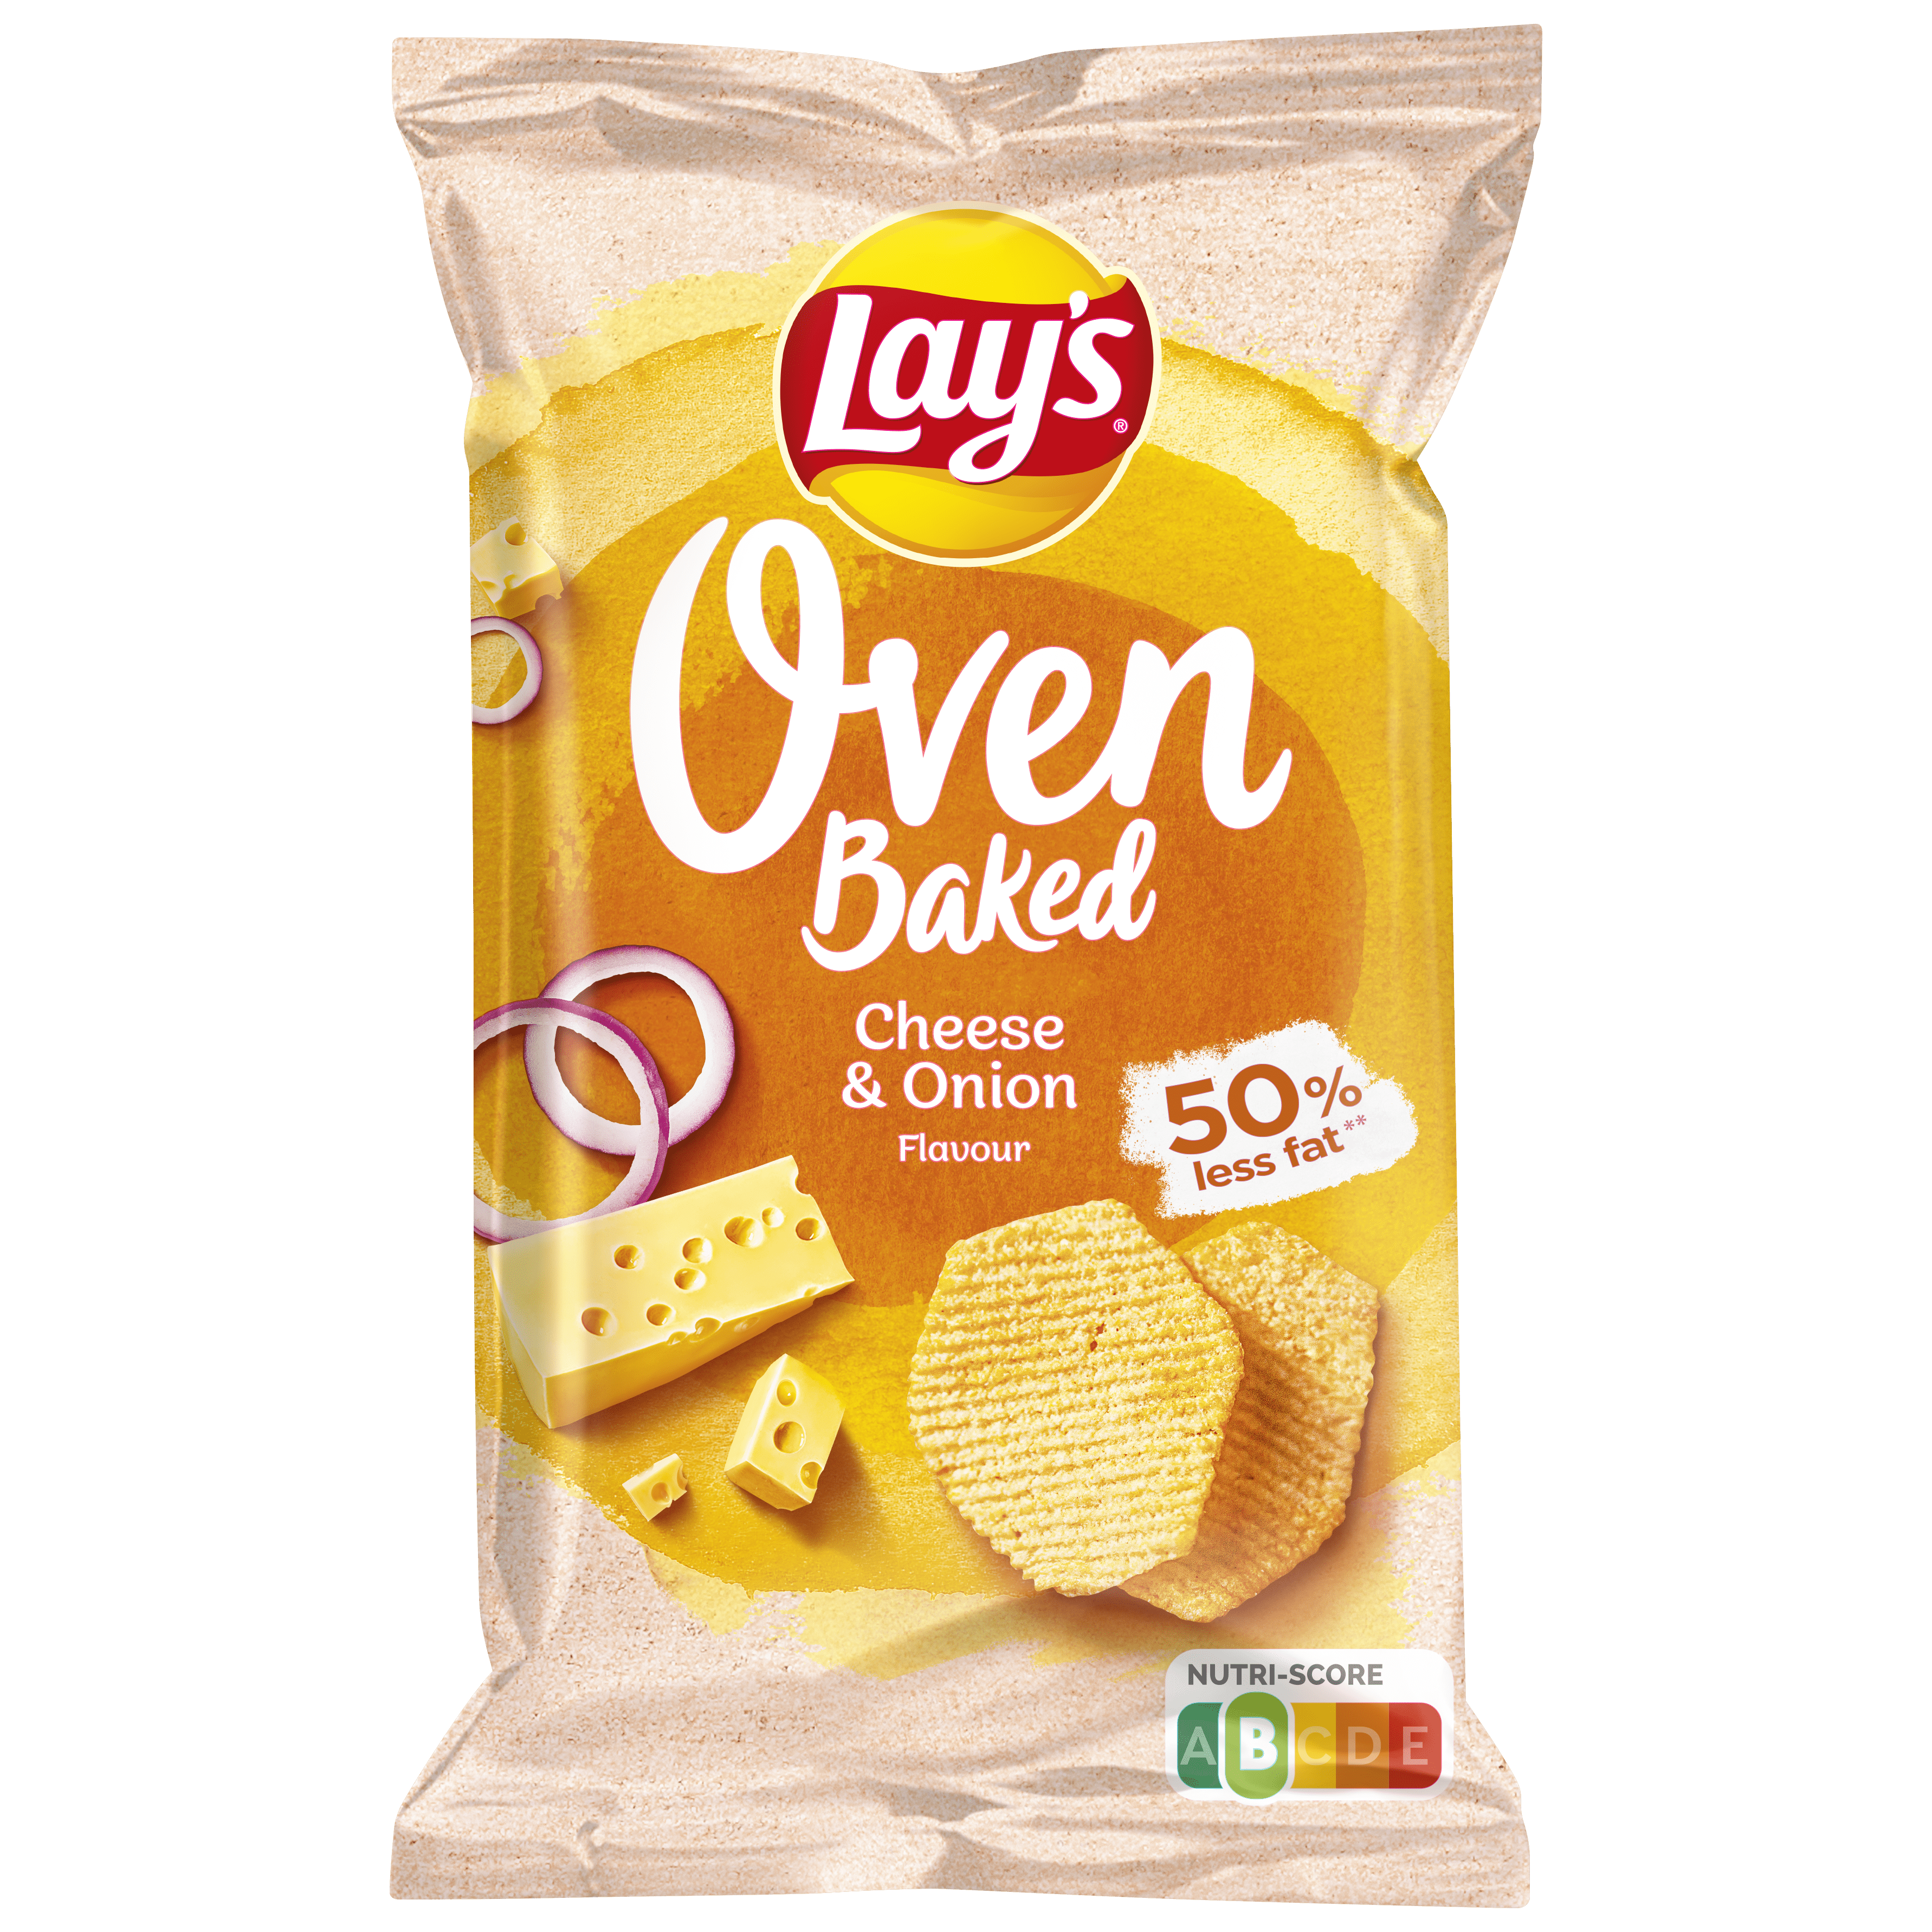 Lay's Oven Baked Cheese & Onion